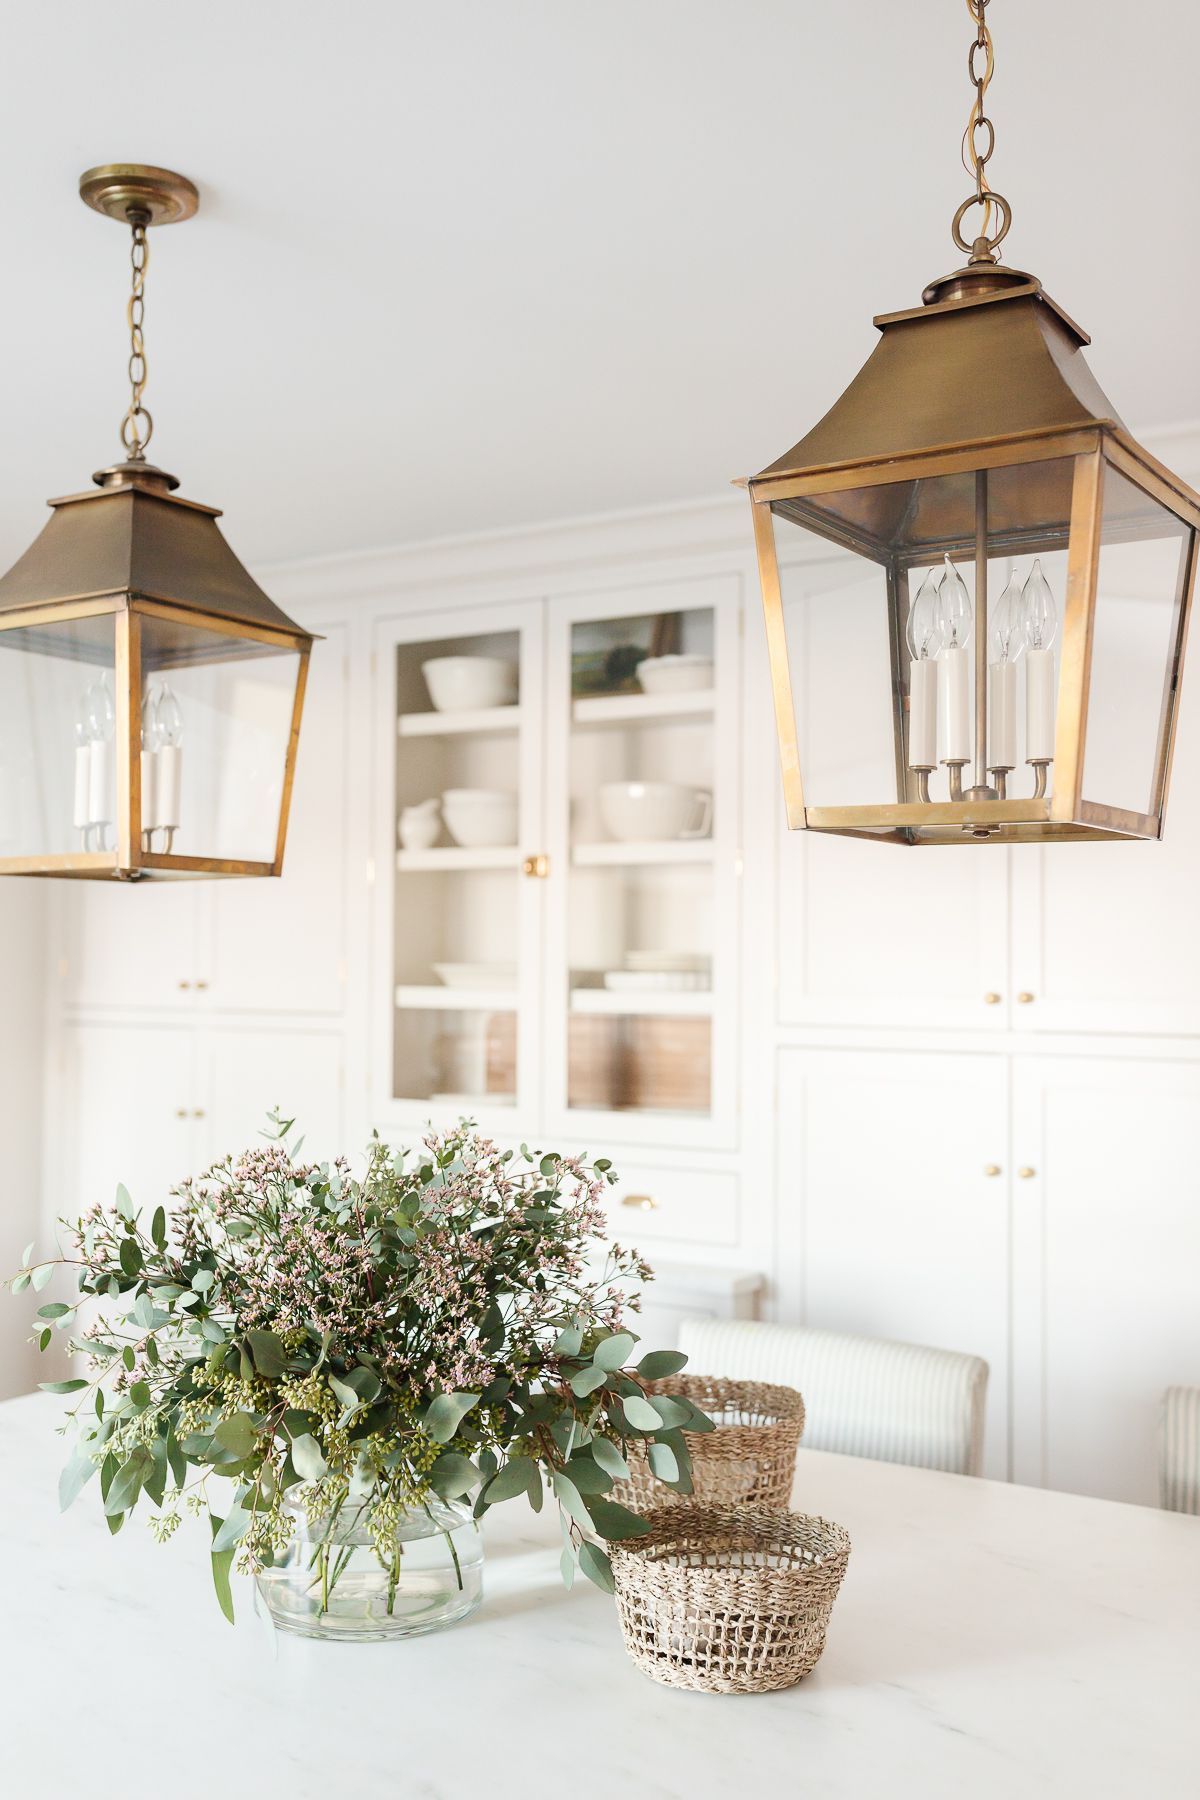 Burnished Brass Lantern Chandeliers Intended For Preferred Brass Lantern Pendant Lights (View 10 of 15)